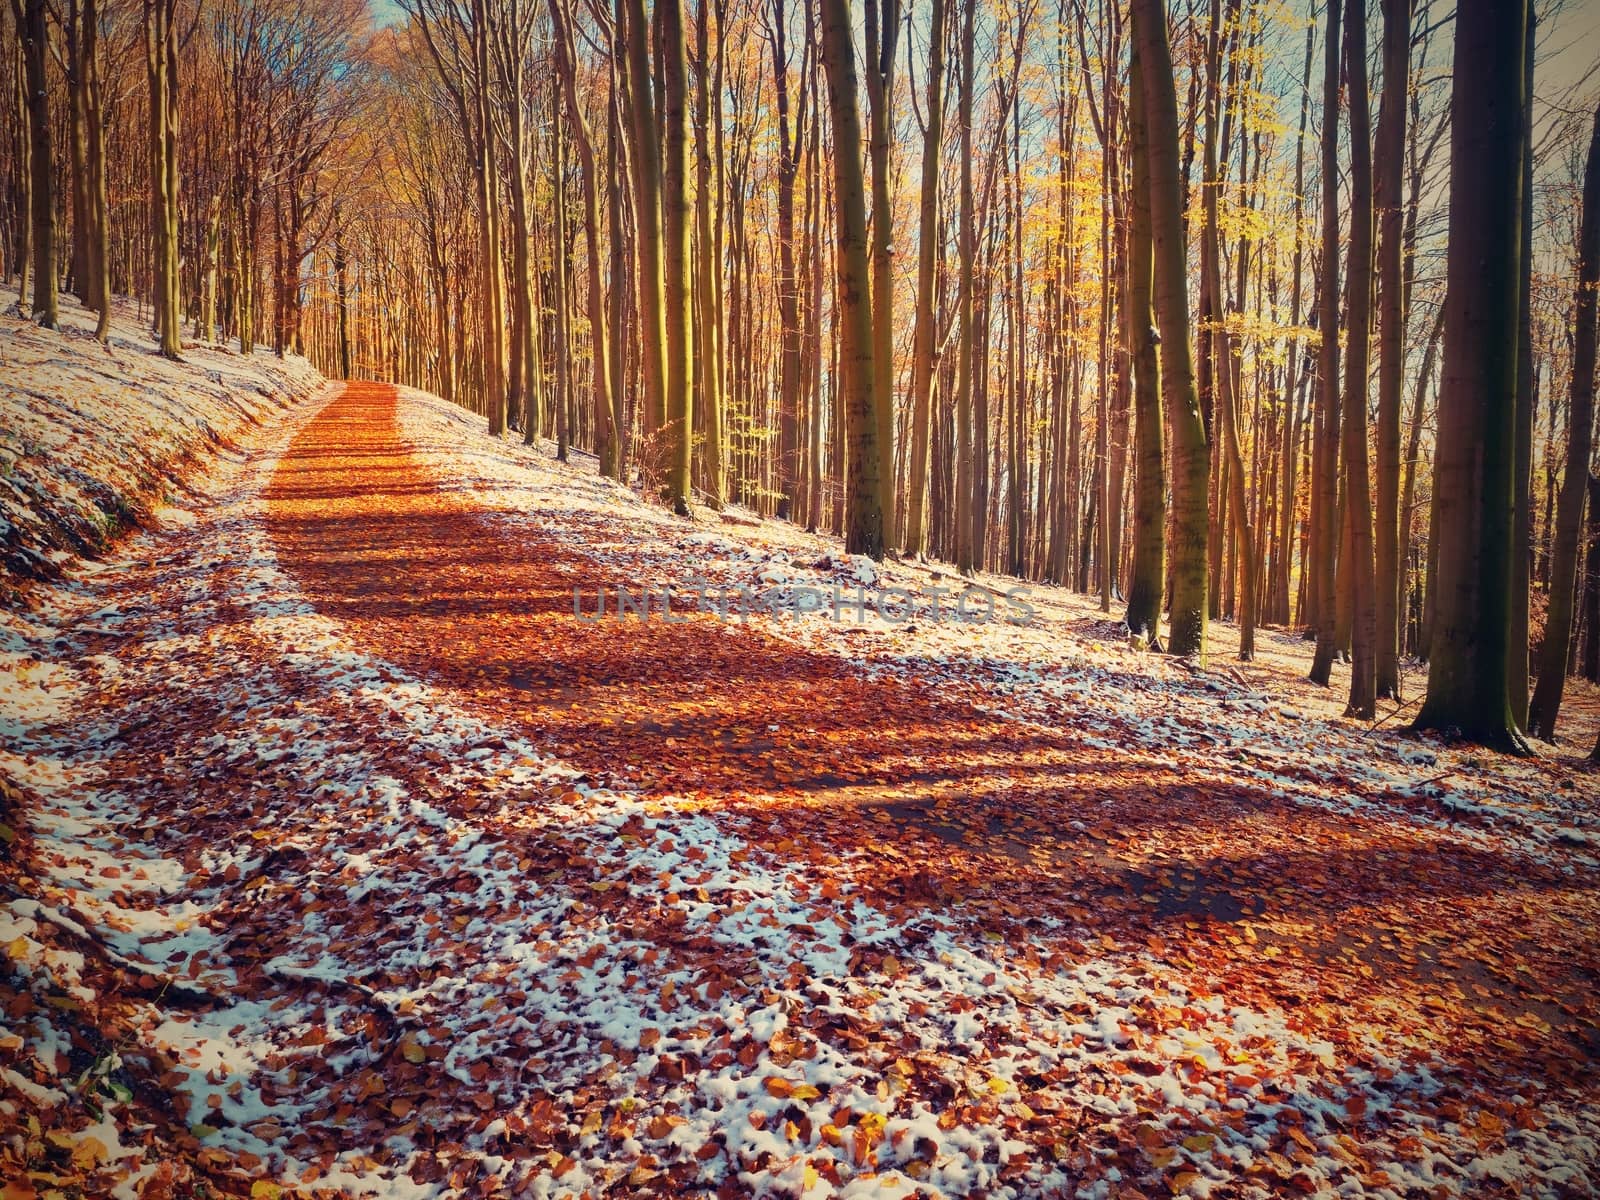 Curved colorful snowy forest road in early winter forest. Sunny day. Fresh powder snow with colors of leaves, yellow green leaves on trees shinning in afternoon sun